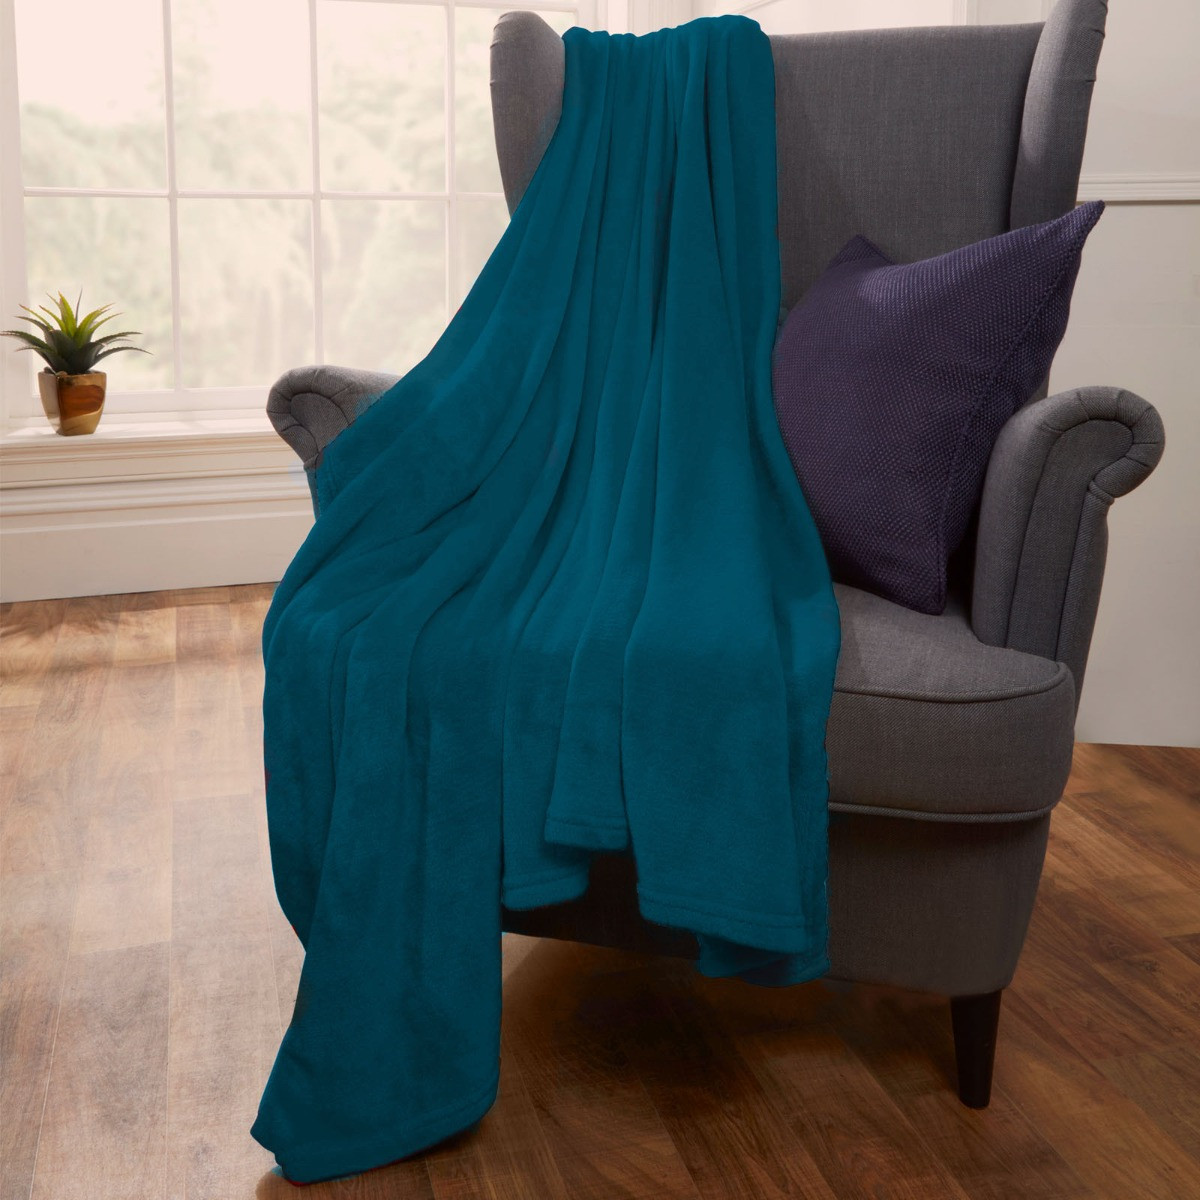 Brentfords Supersoft Throw, Turquoise - 120 x 150cm>